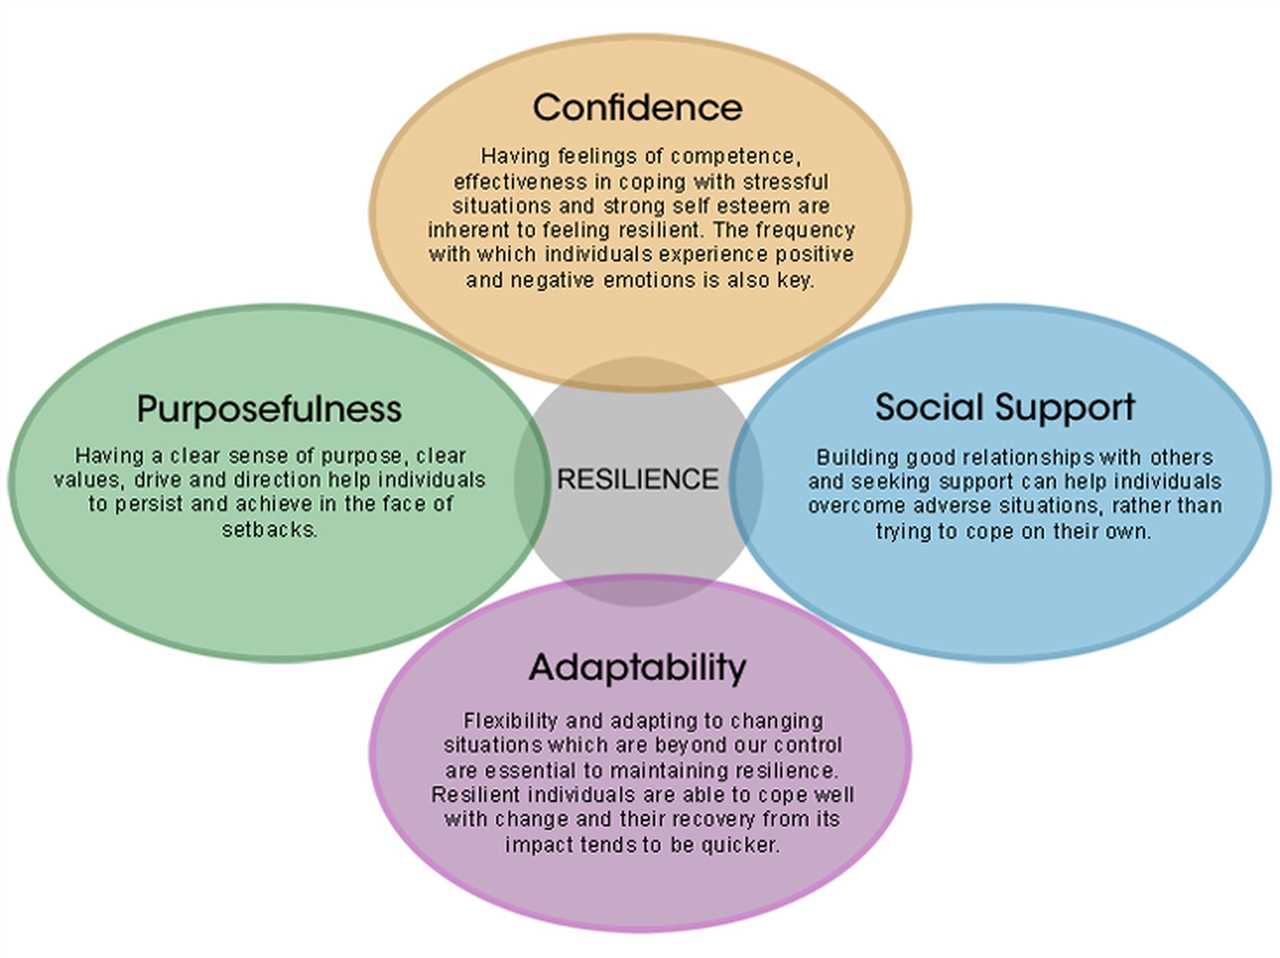 Understanding the Traits of Resilient Individuals